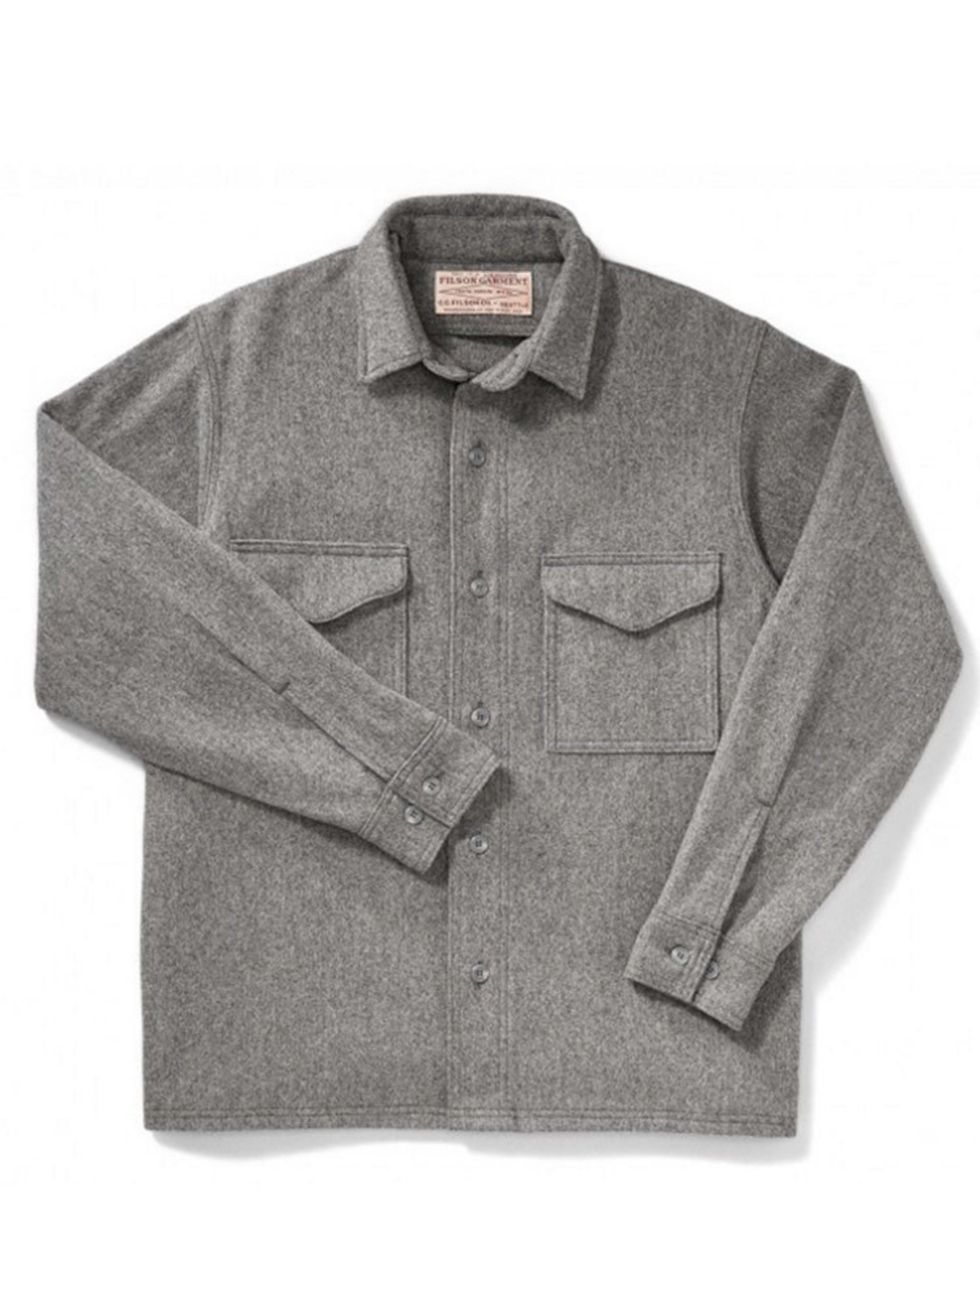 <p>A charcoal overshirt that begs to be layered. Because overshirts are in, okay.</p>

<p><a href="http://www.filson.com/men/shirts/jac-shirt-alaska-fit-10047.html" target="_blank">Filson</a> Jac Wool Shirt, £144 </p>